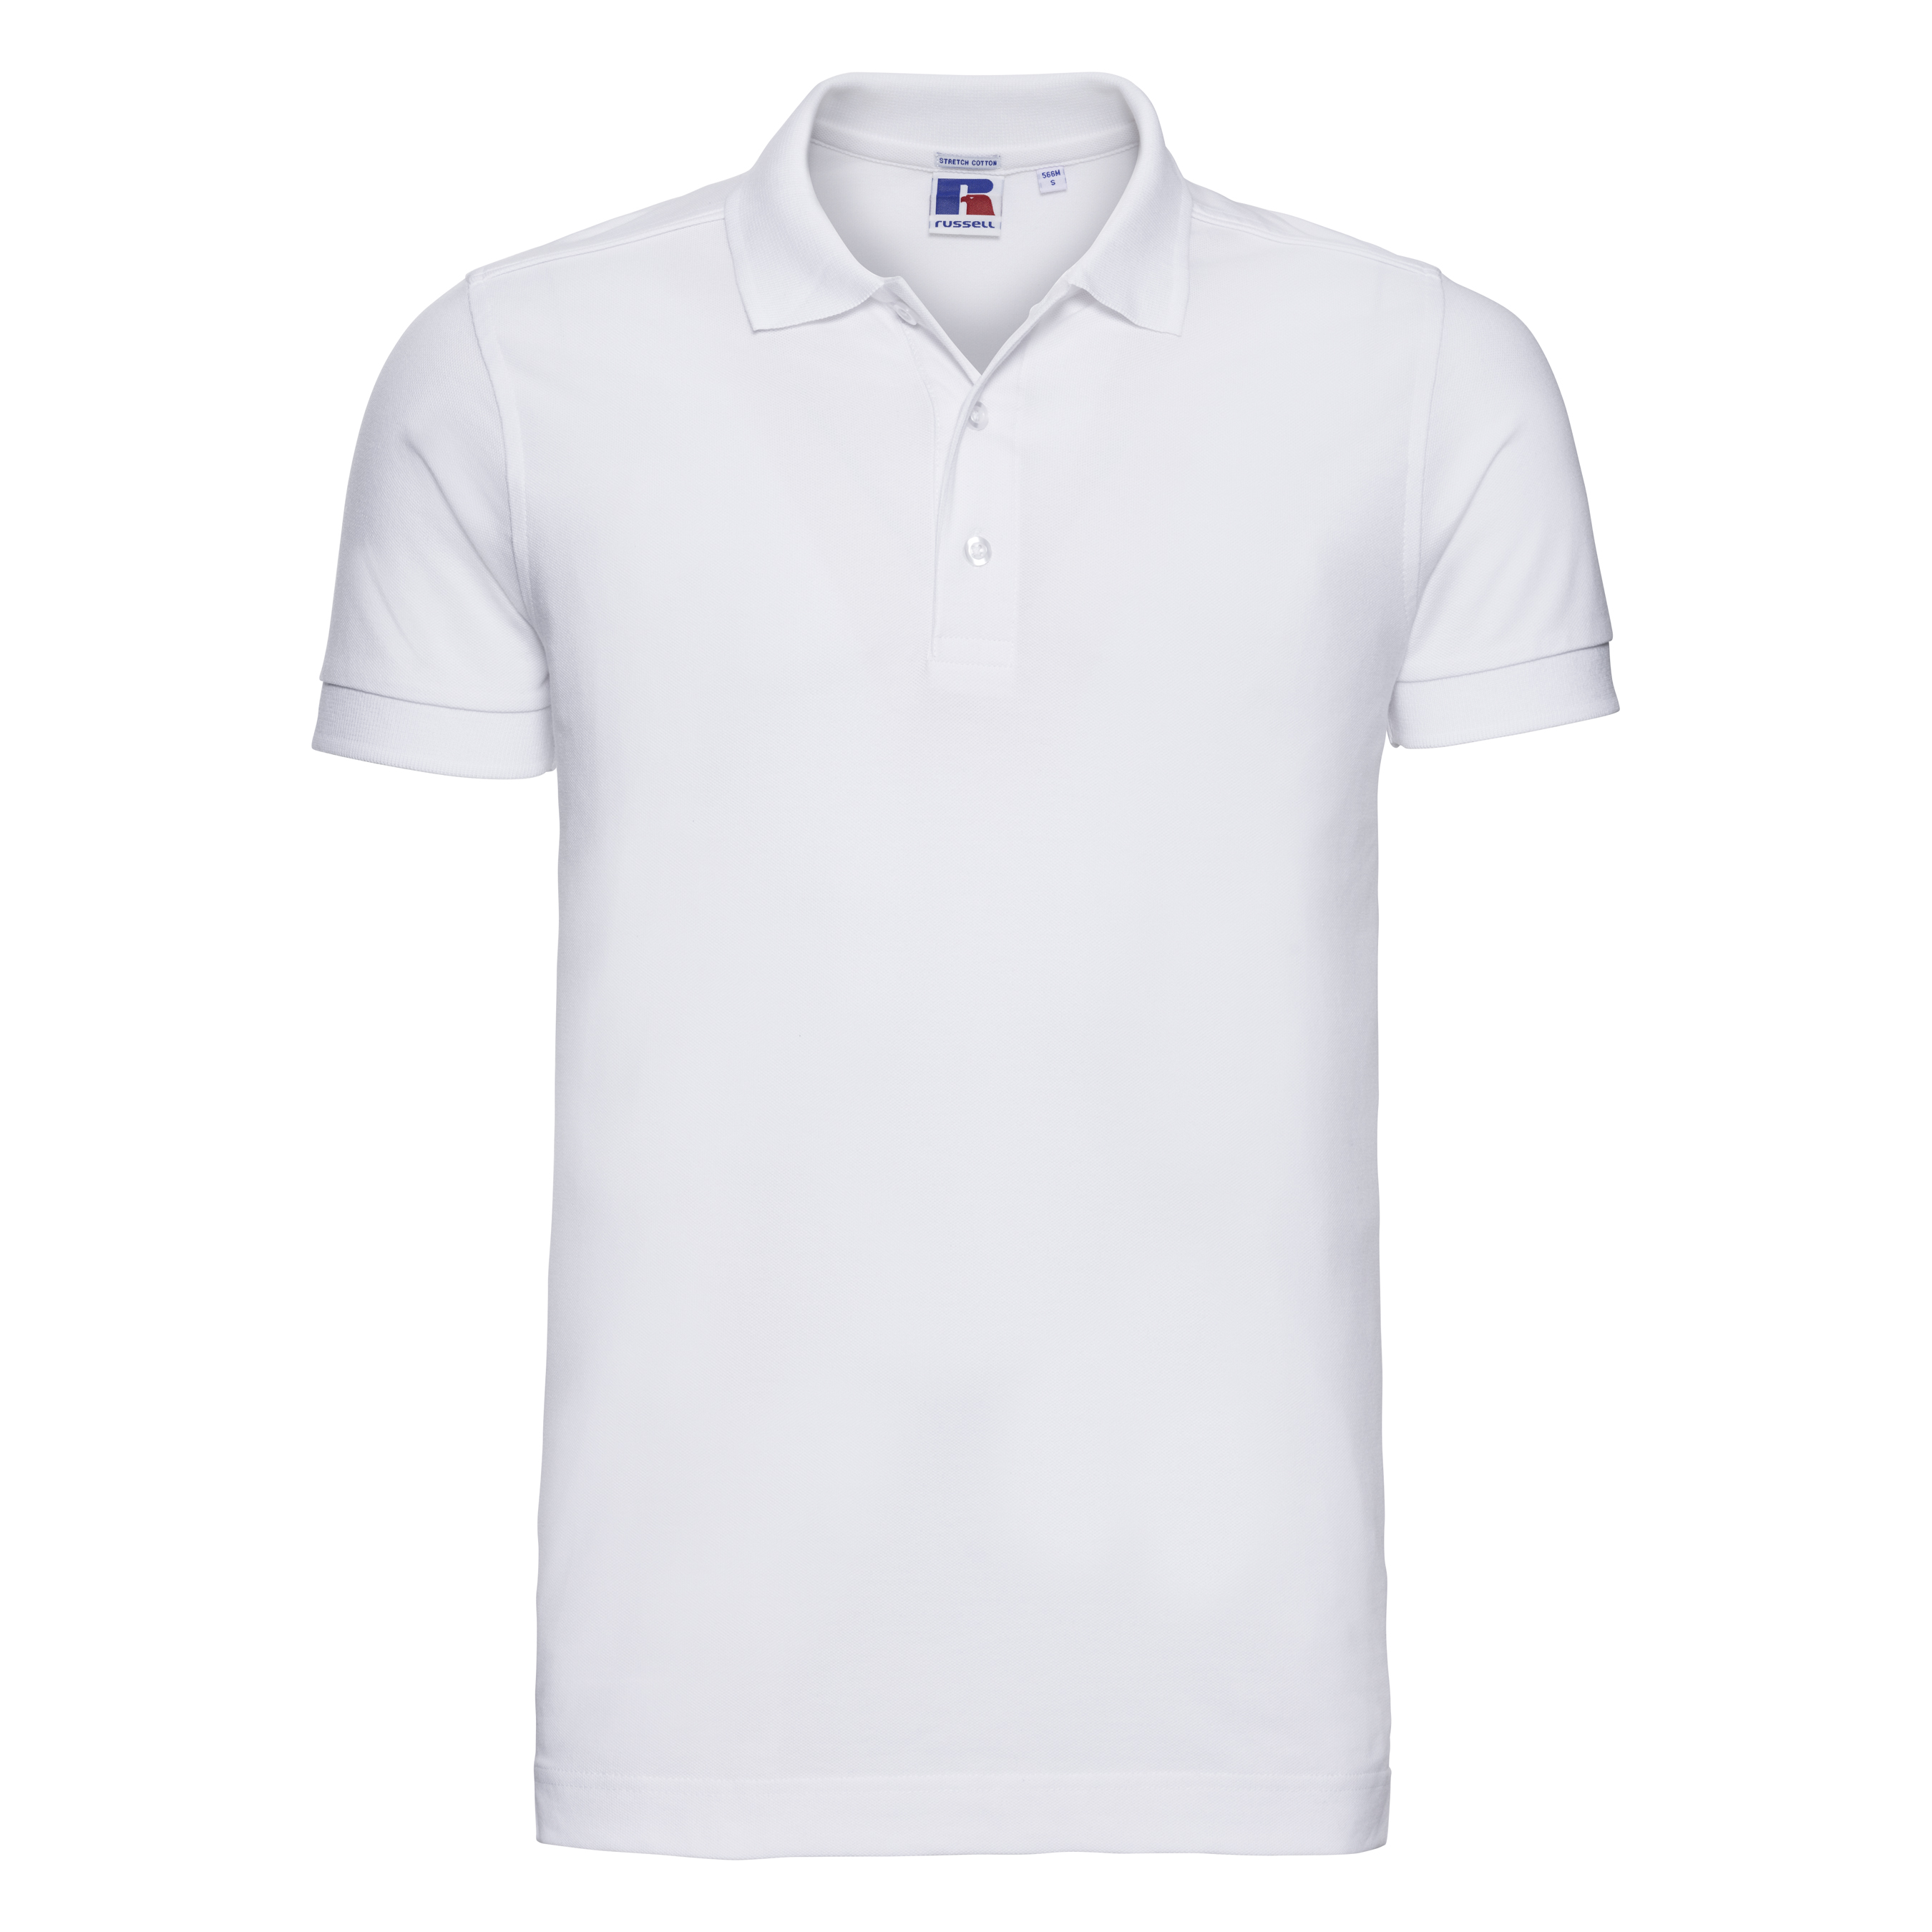 ax-httpswebsystems.s3.amazonaws.comtmp_for_downloadrussell-stretch-polo-white.jpg